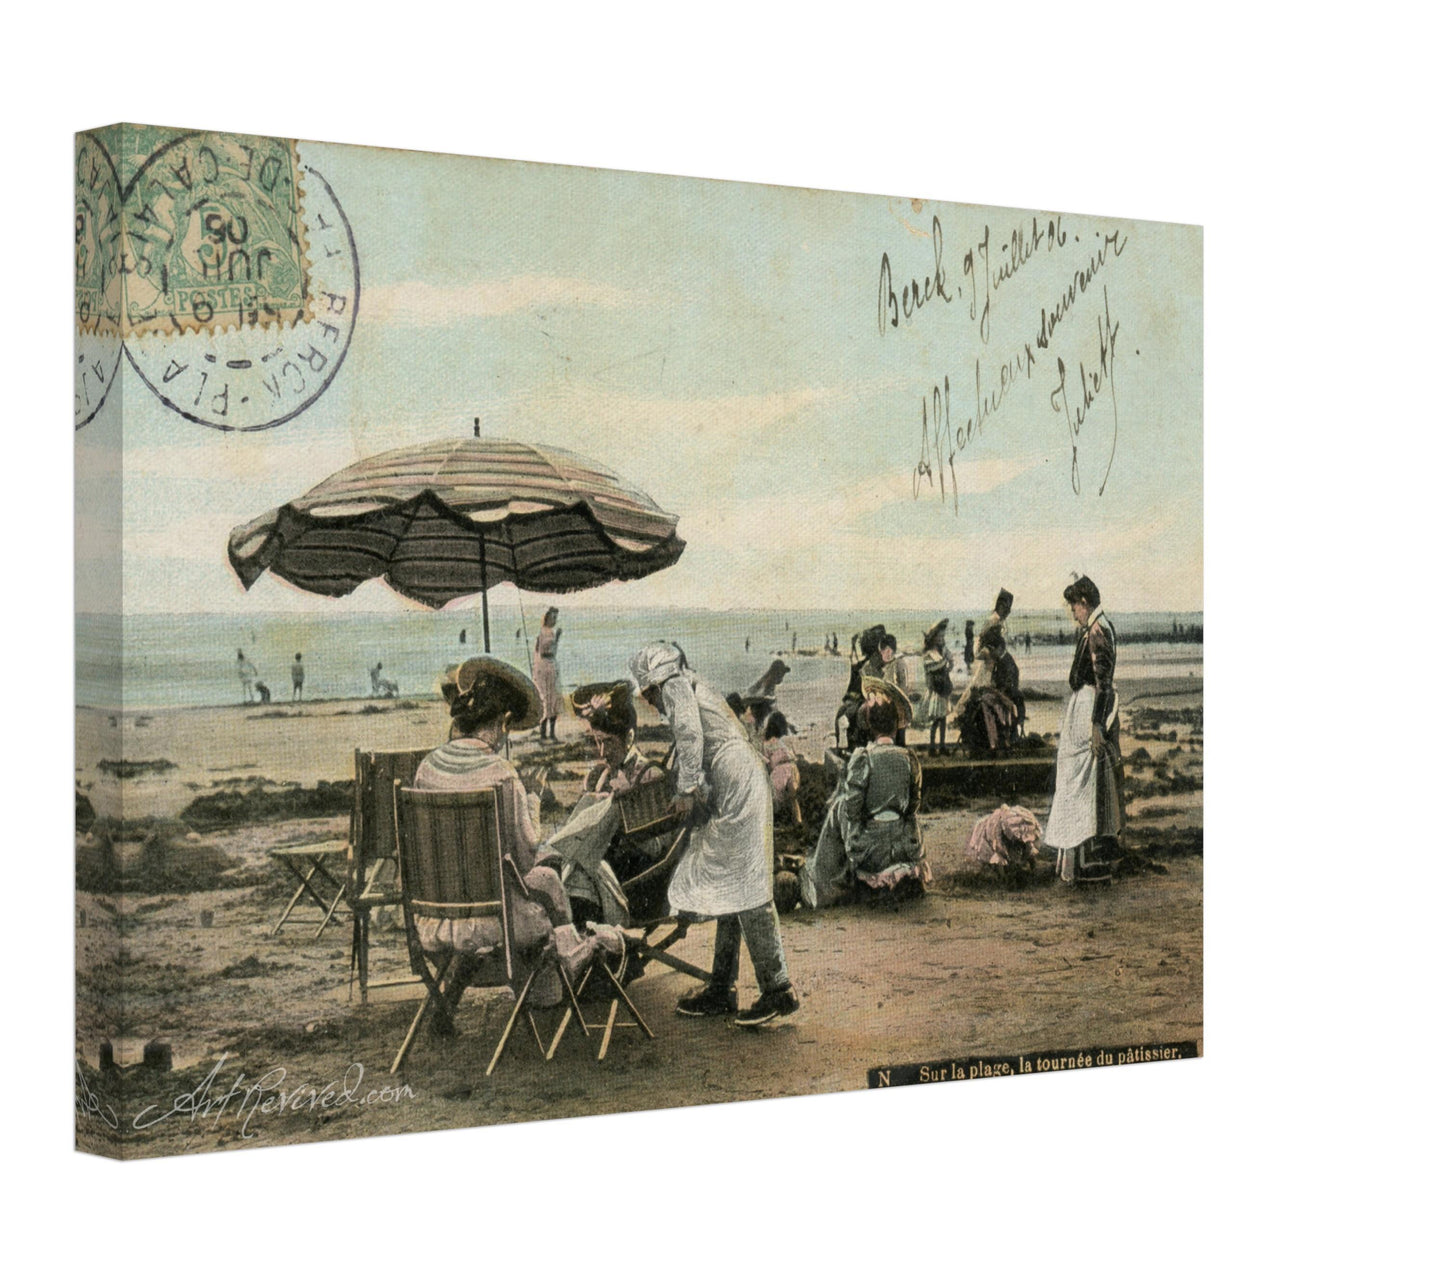 Berck plage-Pastry chef's tour